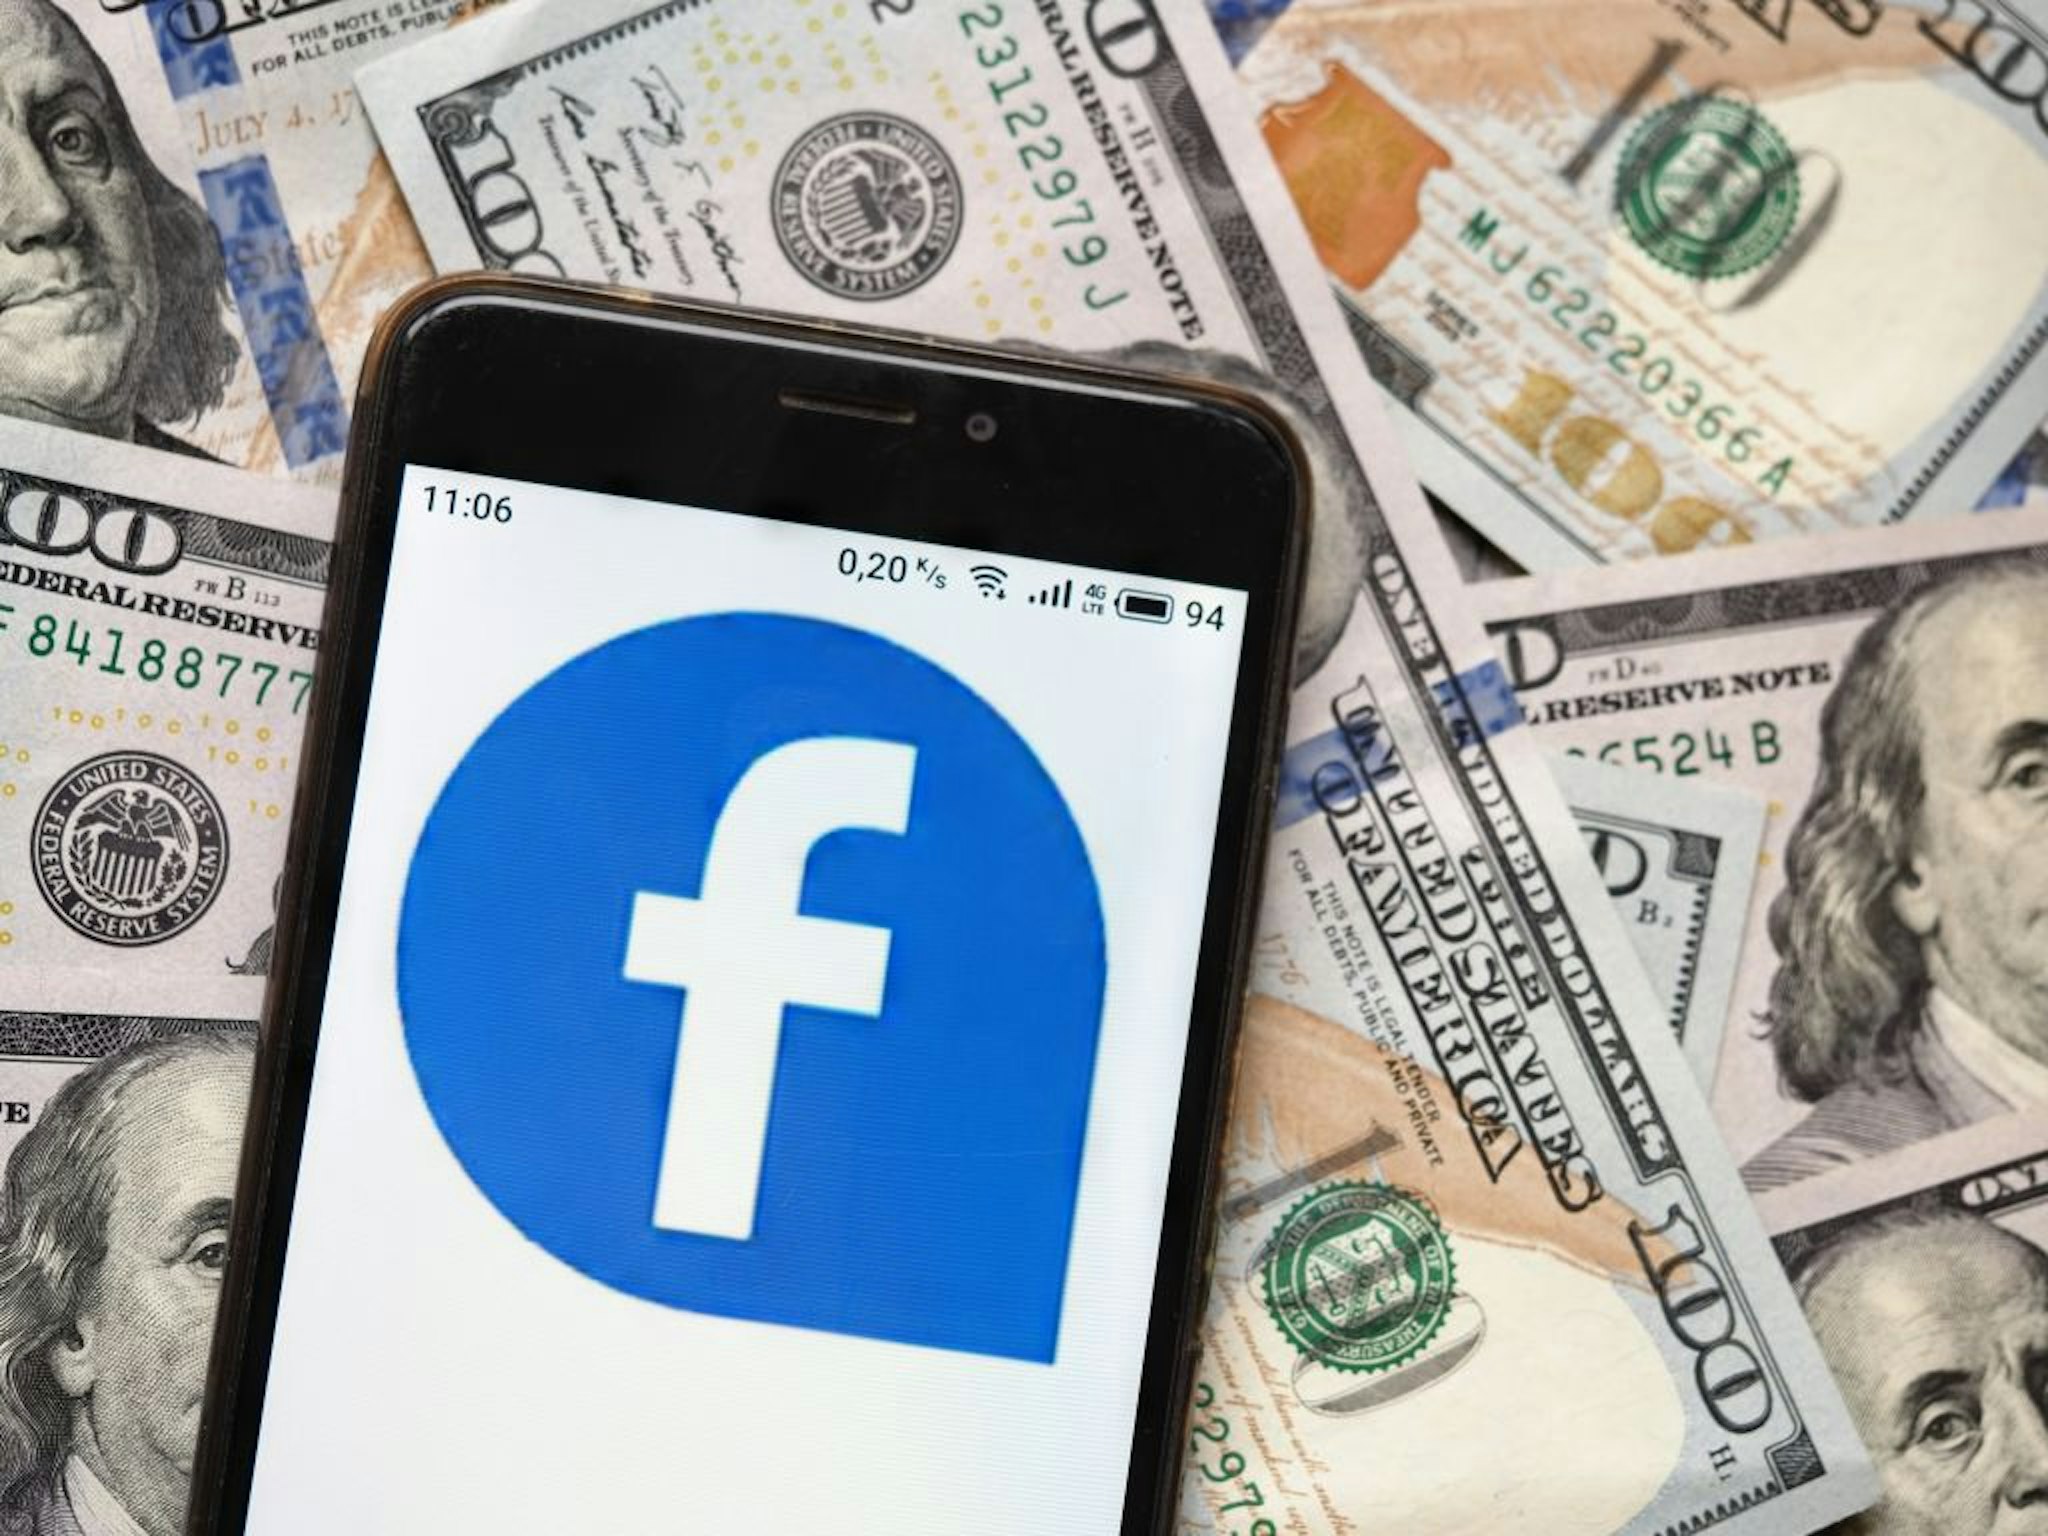 UKRAINE - 2020/09/04: In this photo illustration a Facebook logo seen displayed on a smartphone with 100 dollar bills in the background. (Photo Illustration by Igor Golovniov/SOPA Images/LightRocket via Getty Images)